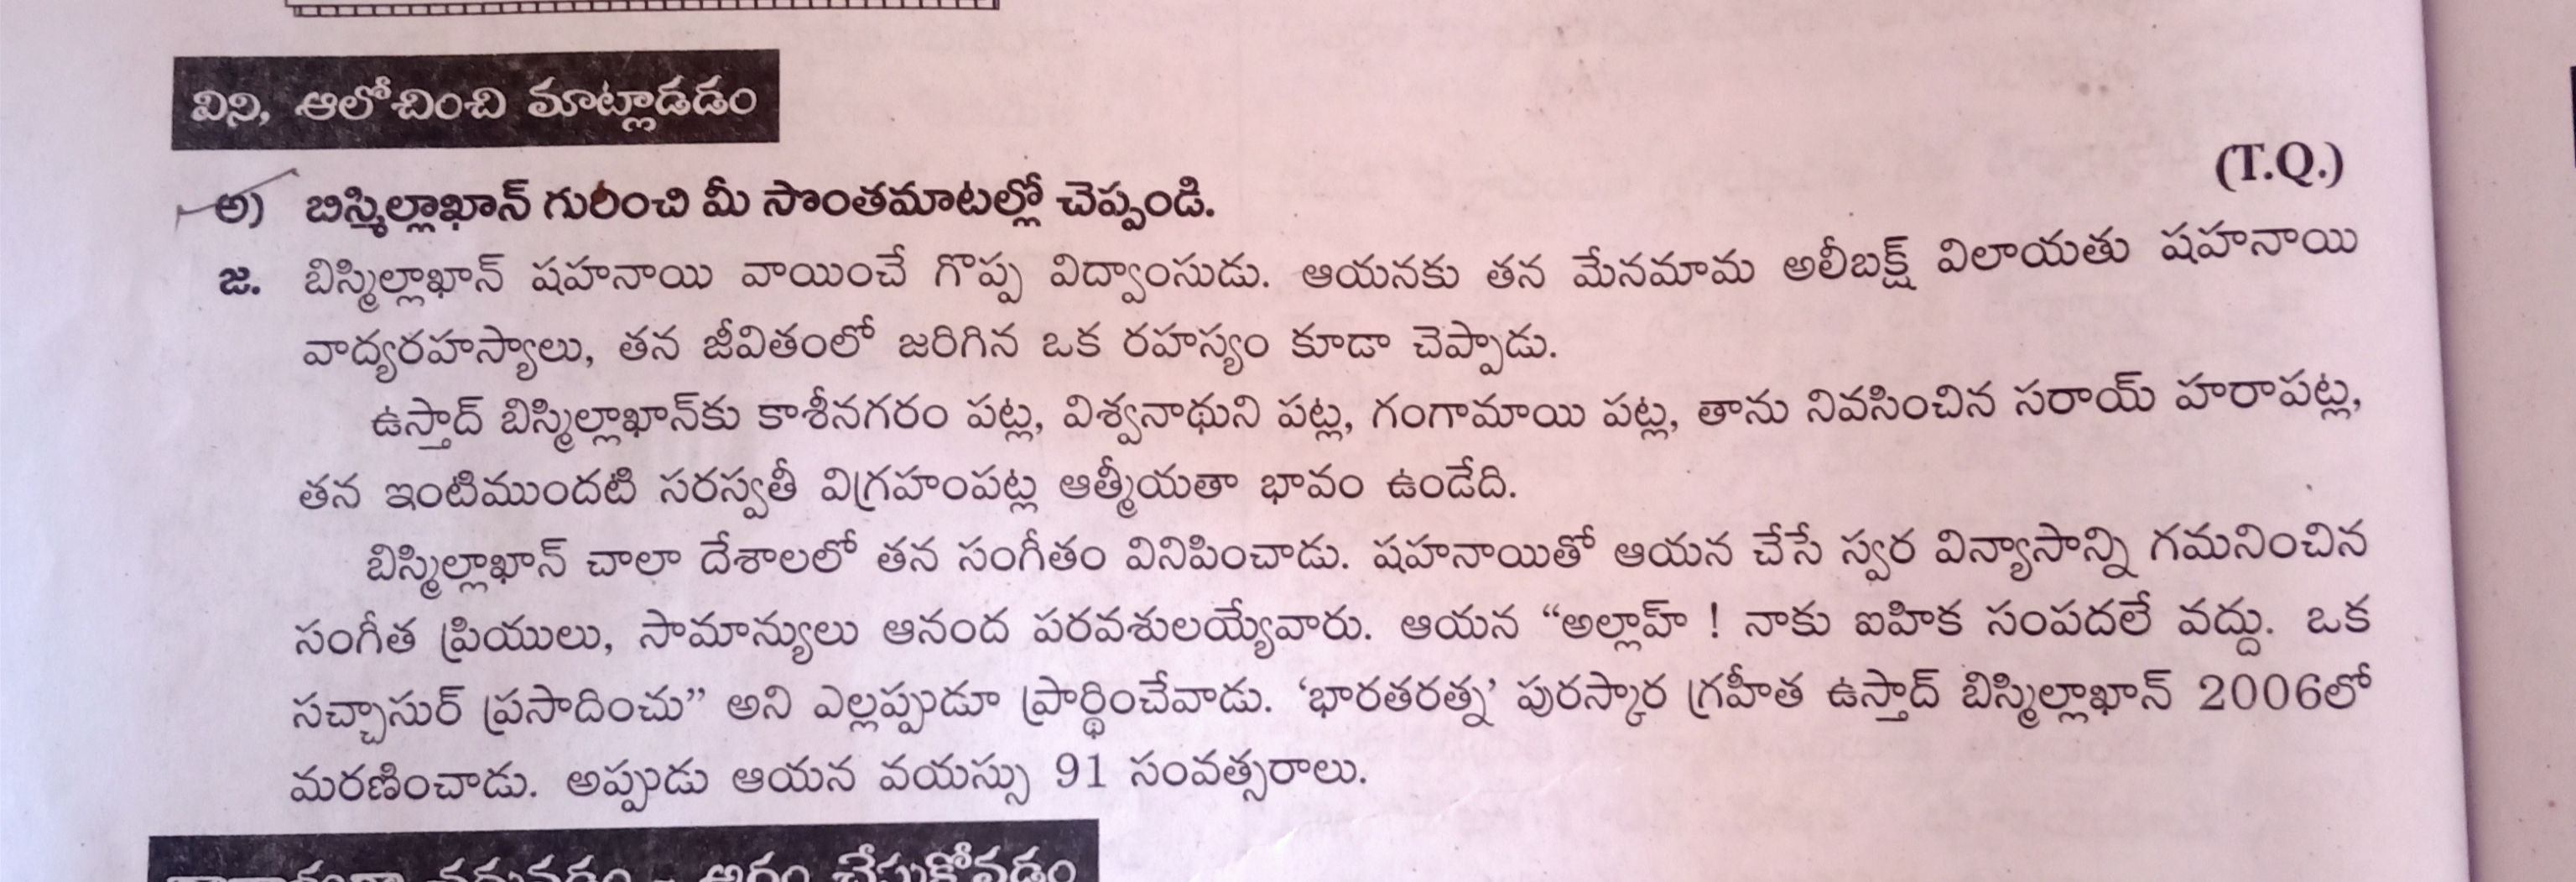 assignment telugu meaning